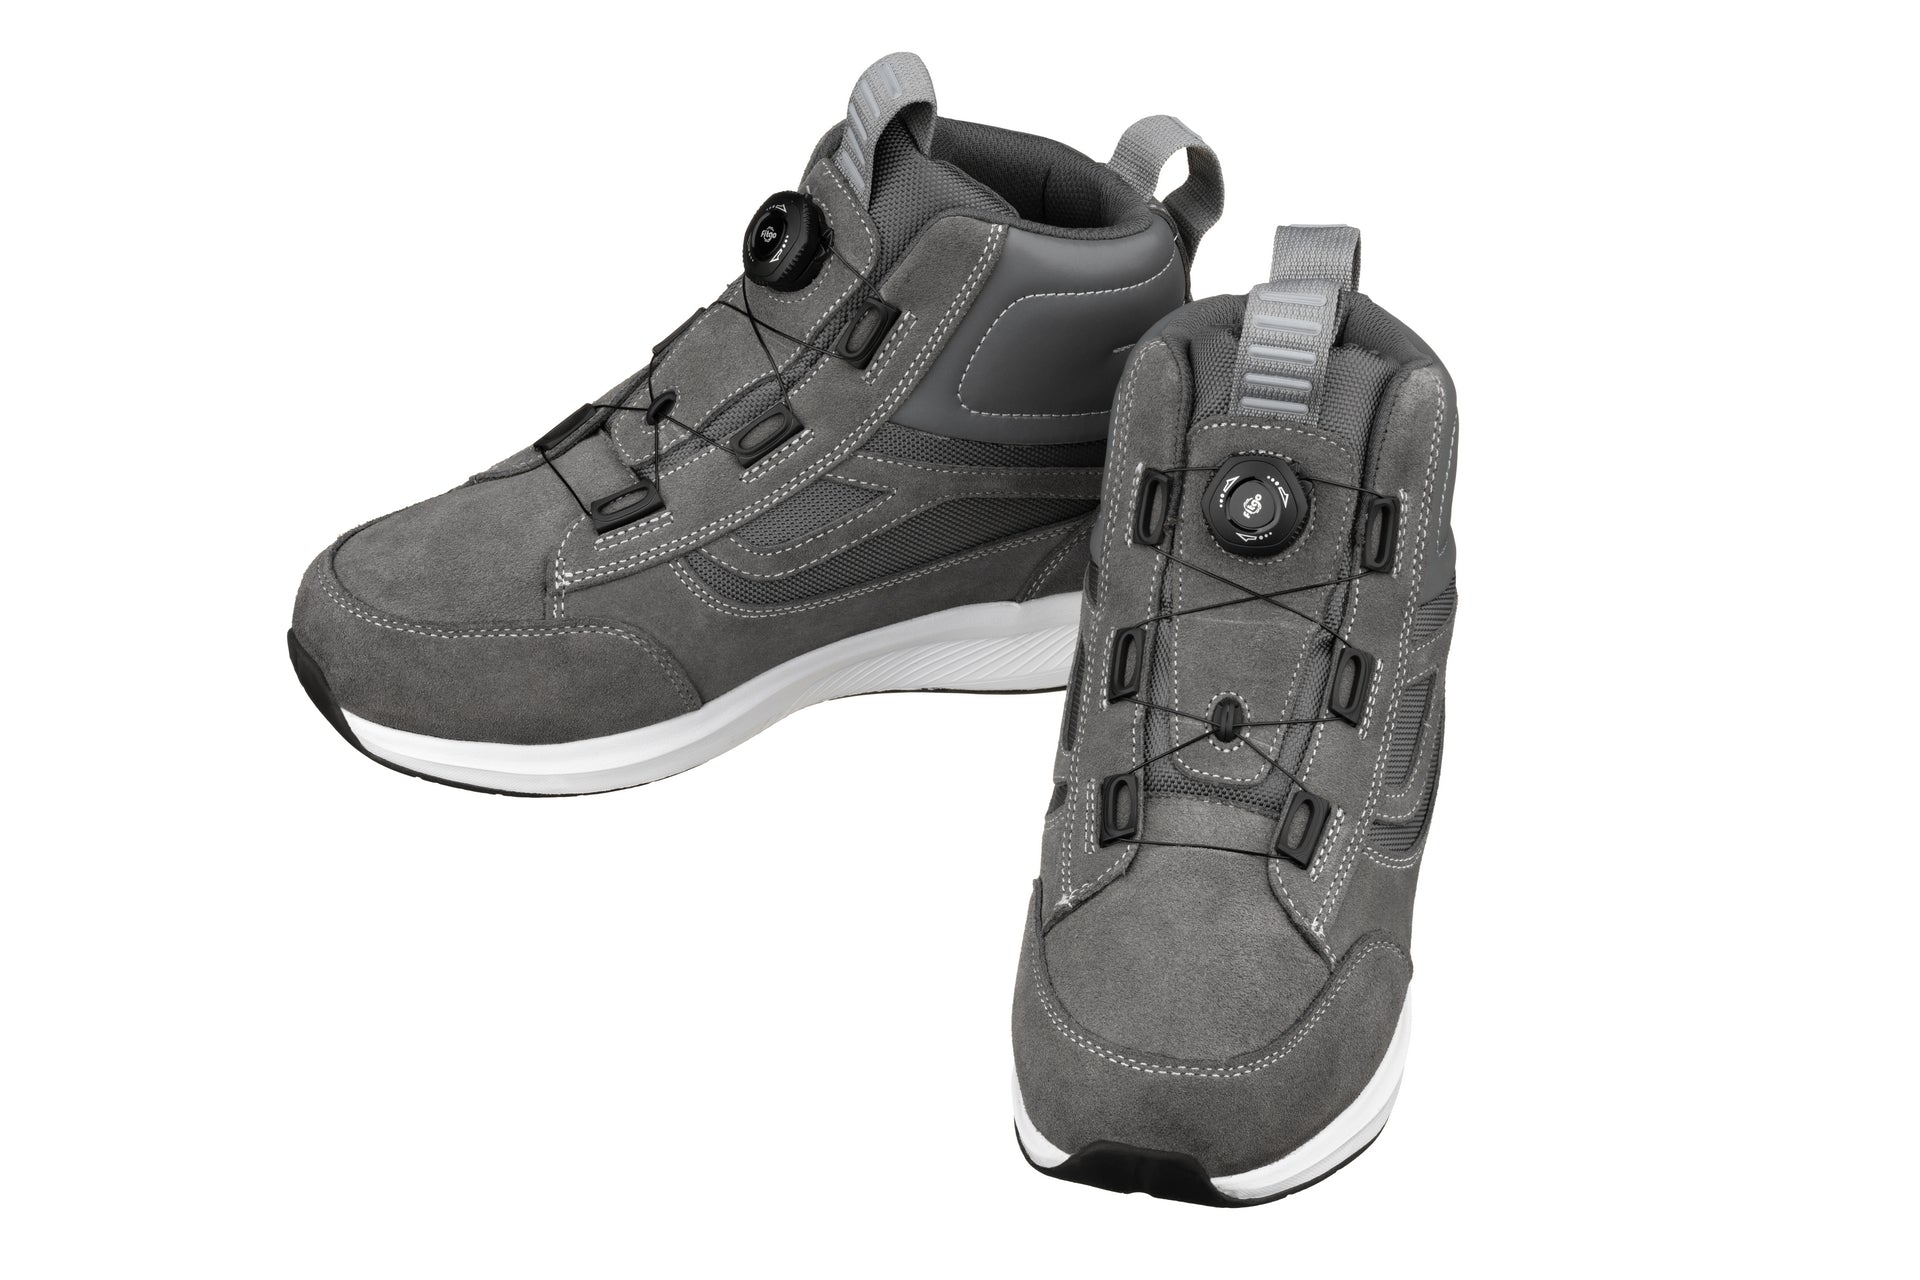 Elevator shoes height increase CALTO - S3221 - 3.2 Inches Taller (Grey) - Lightweight Sneakers